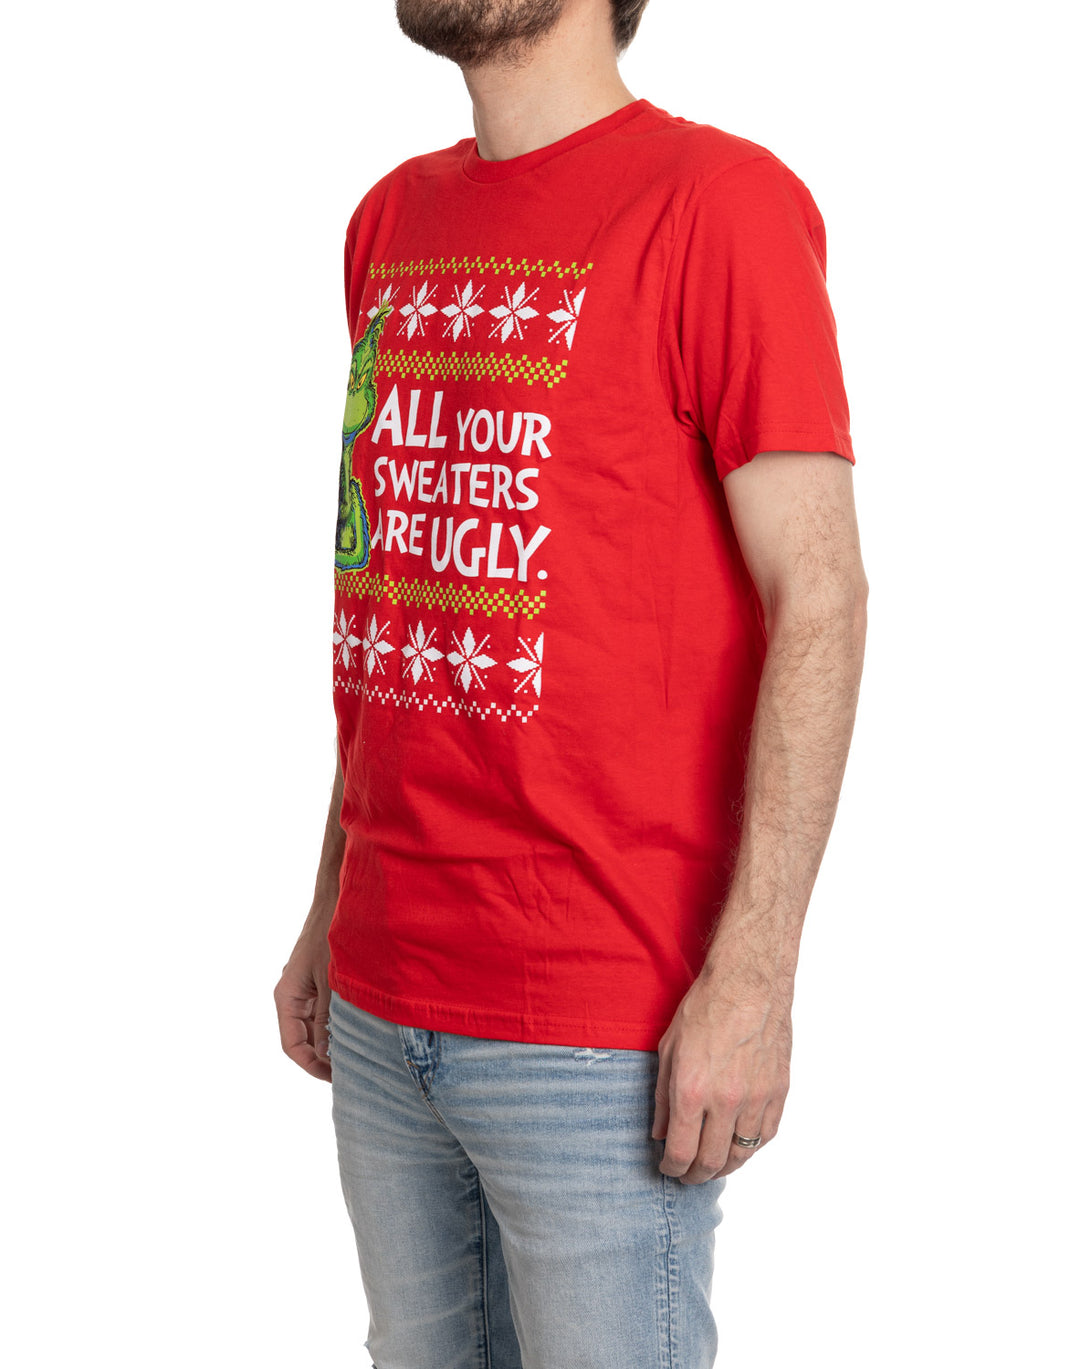 Grinch T-shirt "All Your Sweaters Are Ugly"